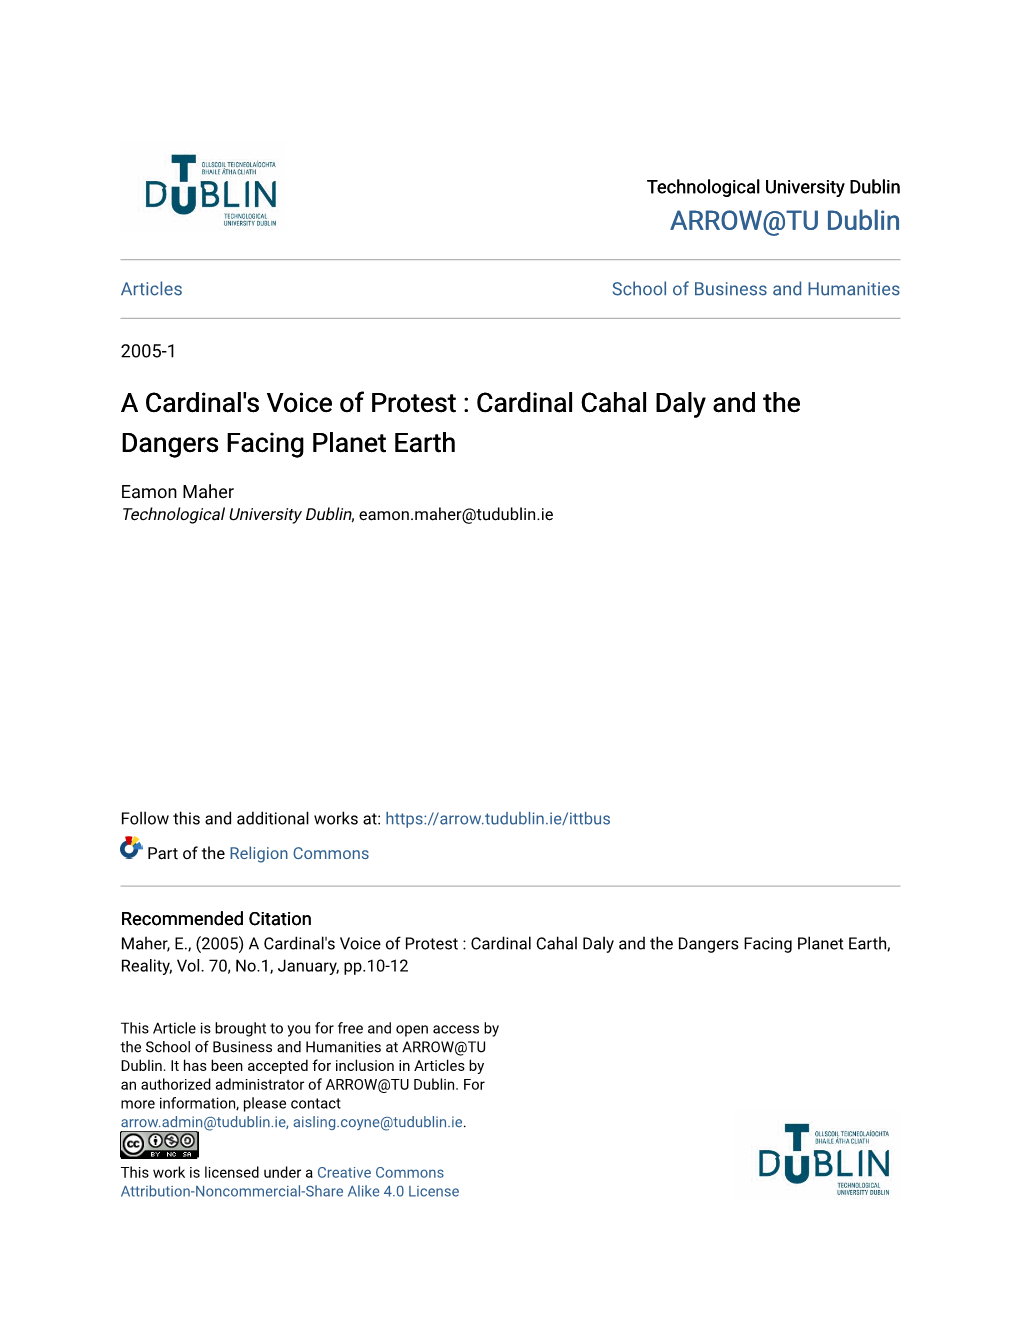 Cardinal Cahal Daly and the Dangers Facing Planet Earth